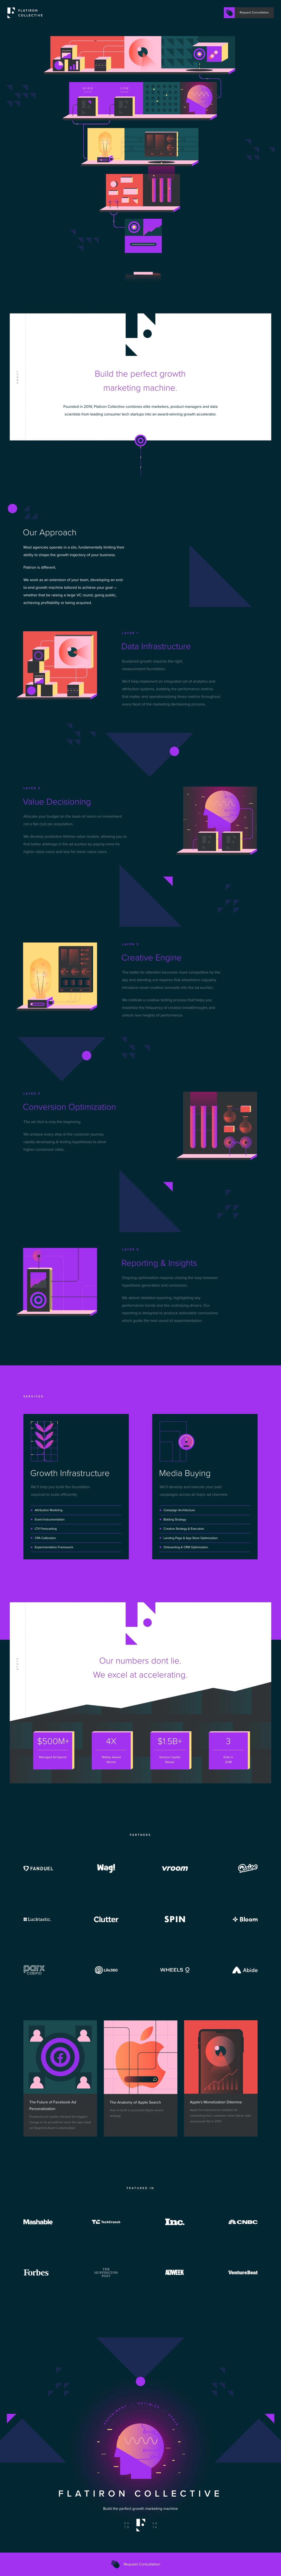 Flatiron Collective Landing Page Example: Founded in 2014, Flatiron Collective combines elite marketers, product managers and data scientists from leading consumer tech startups into an award-winning growth accelerator.